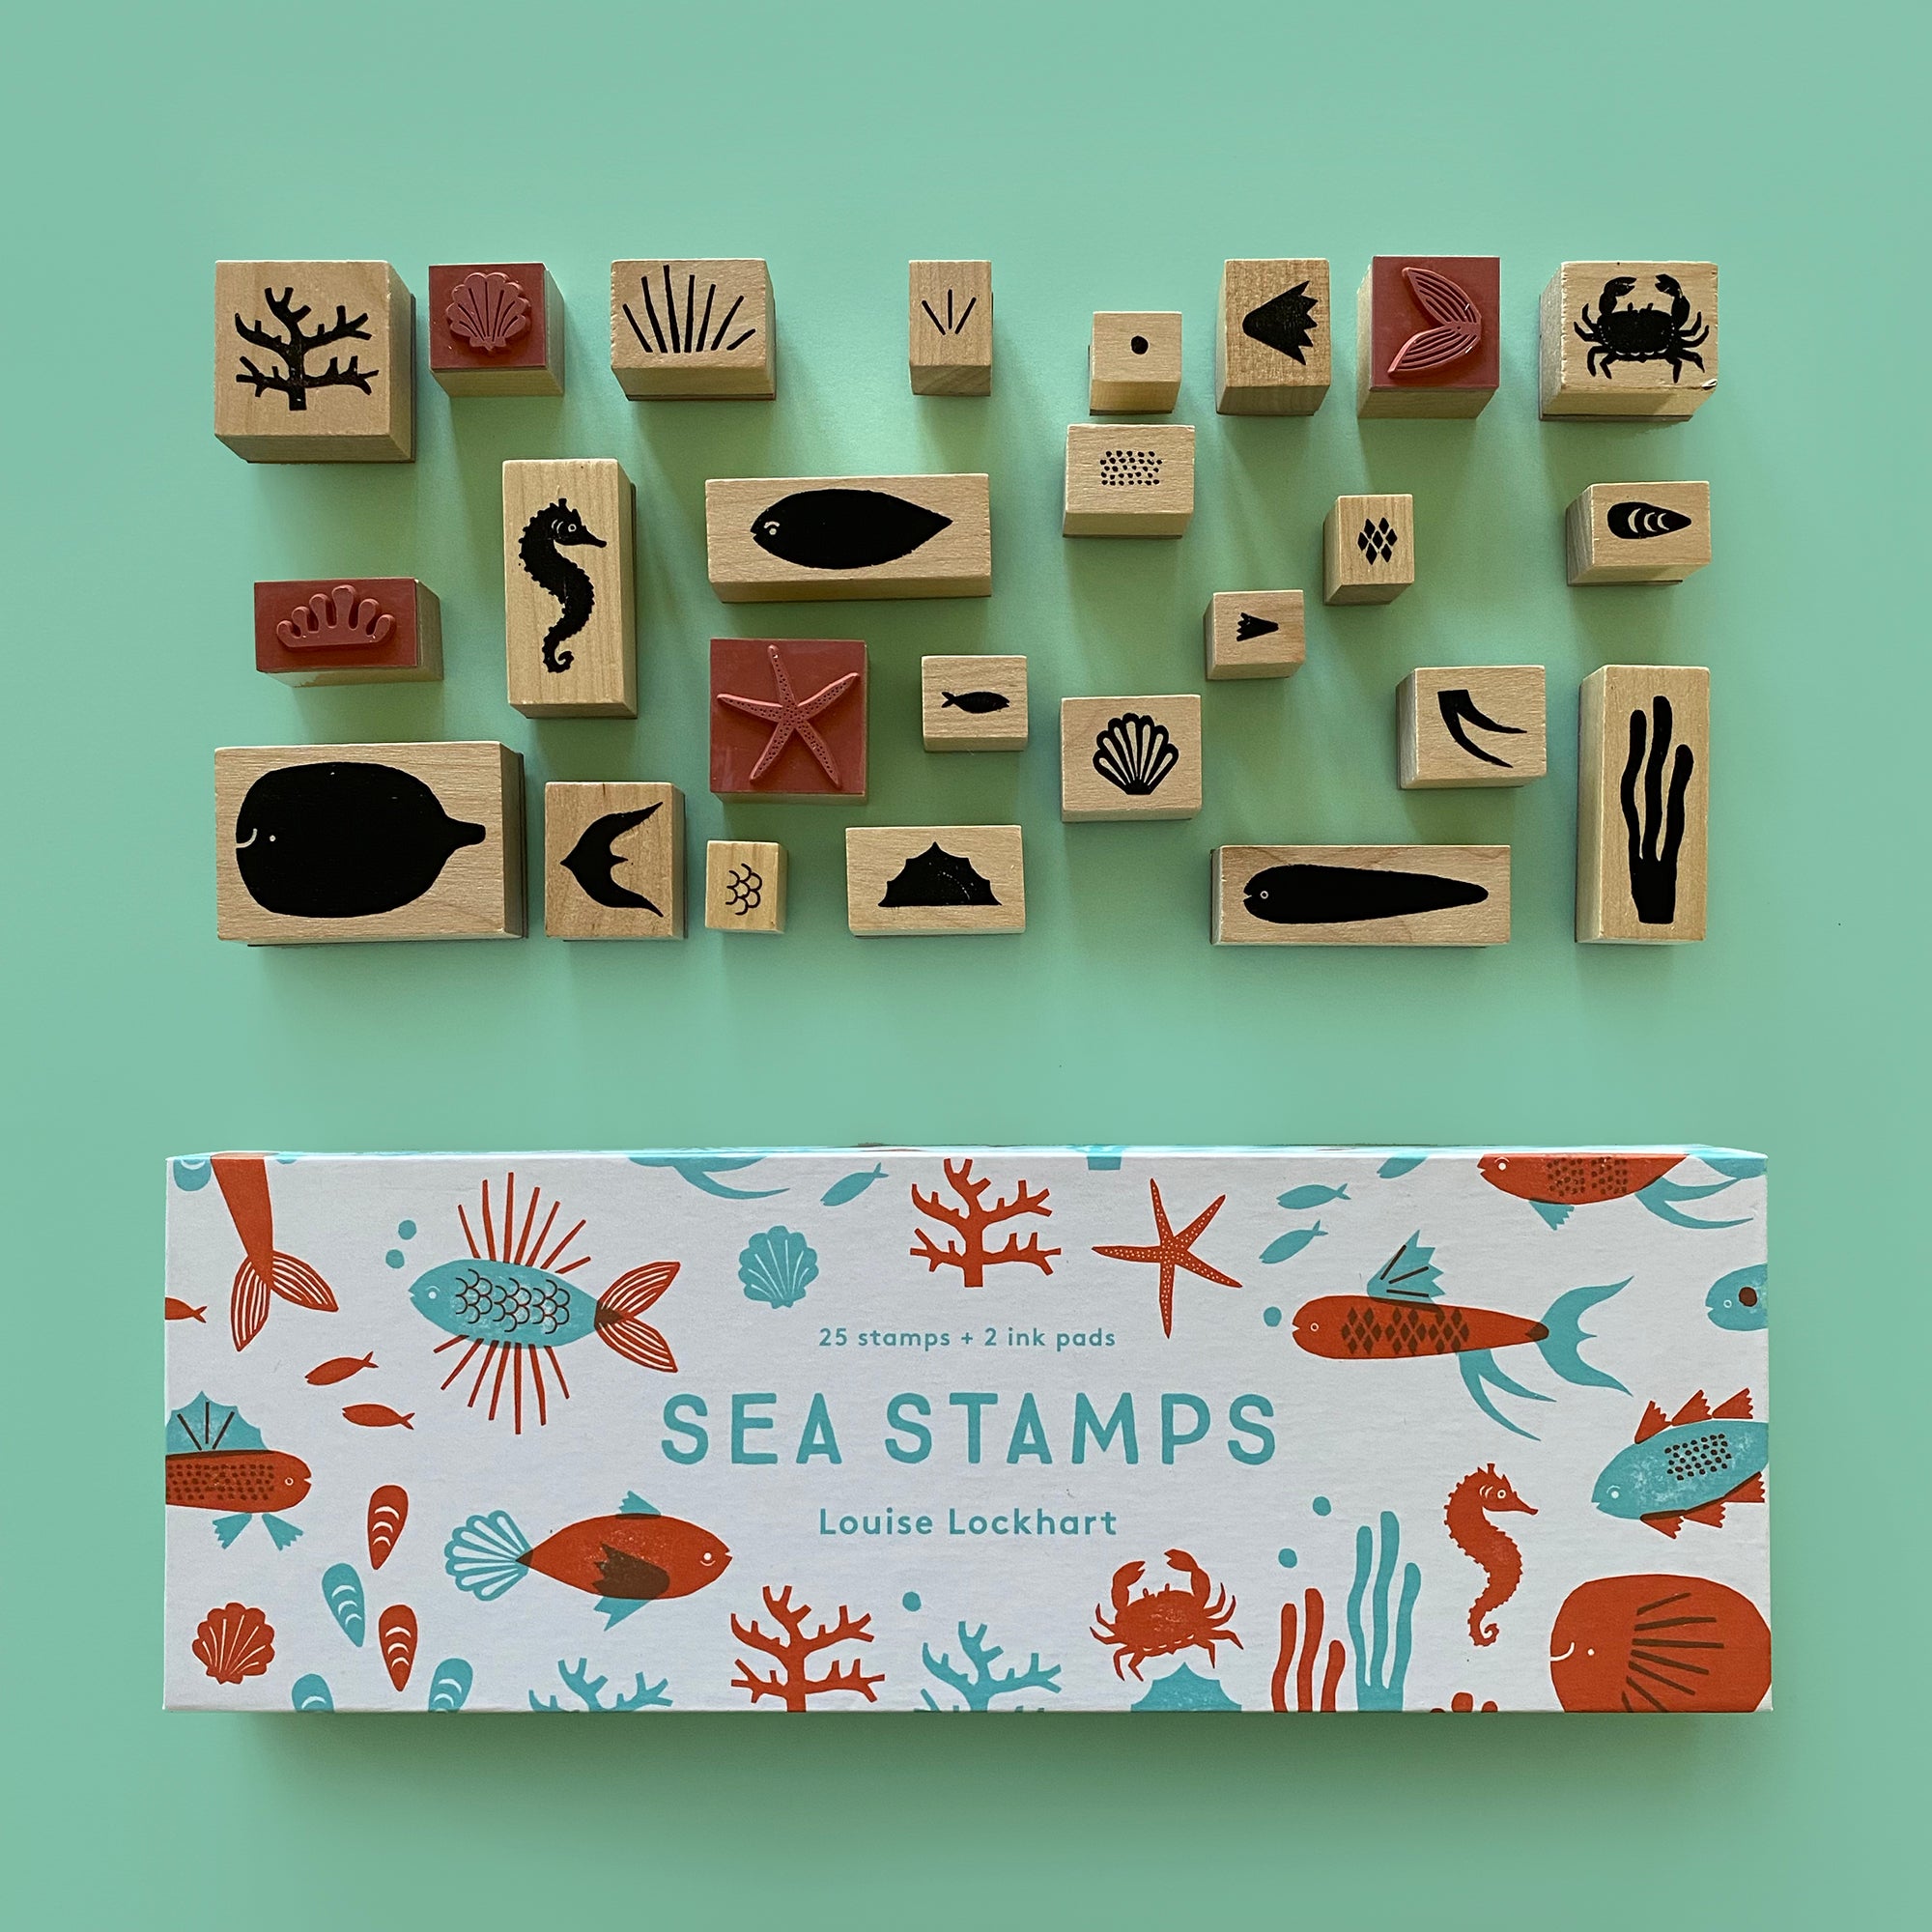 STAMPVILLE Stamp Set - Mini Mad Things